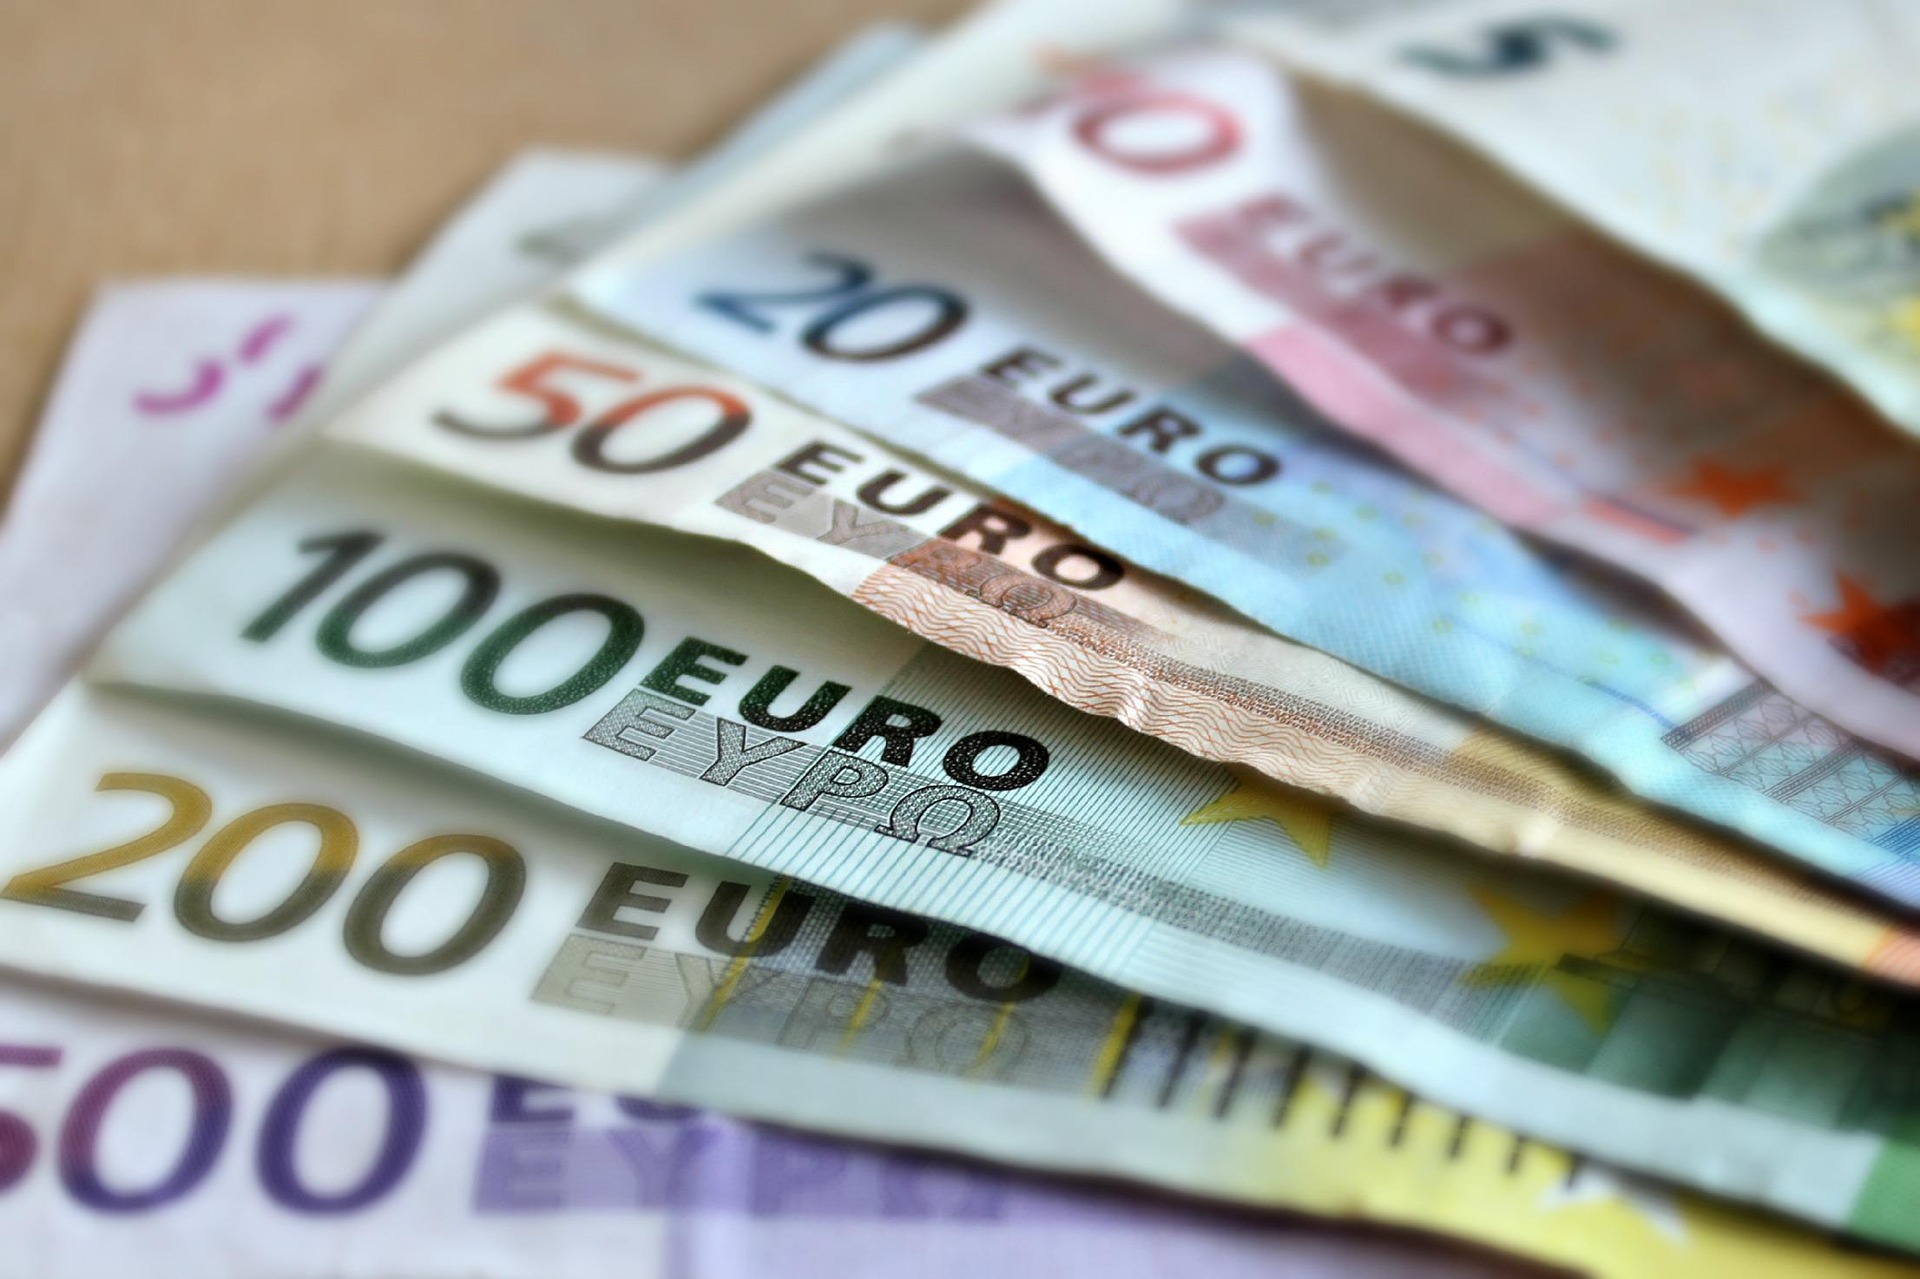 Croatia Sees Price Hikes with Introduction of the Euro